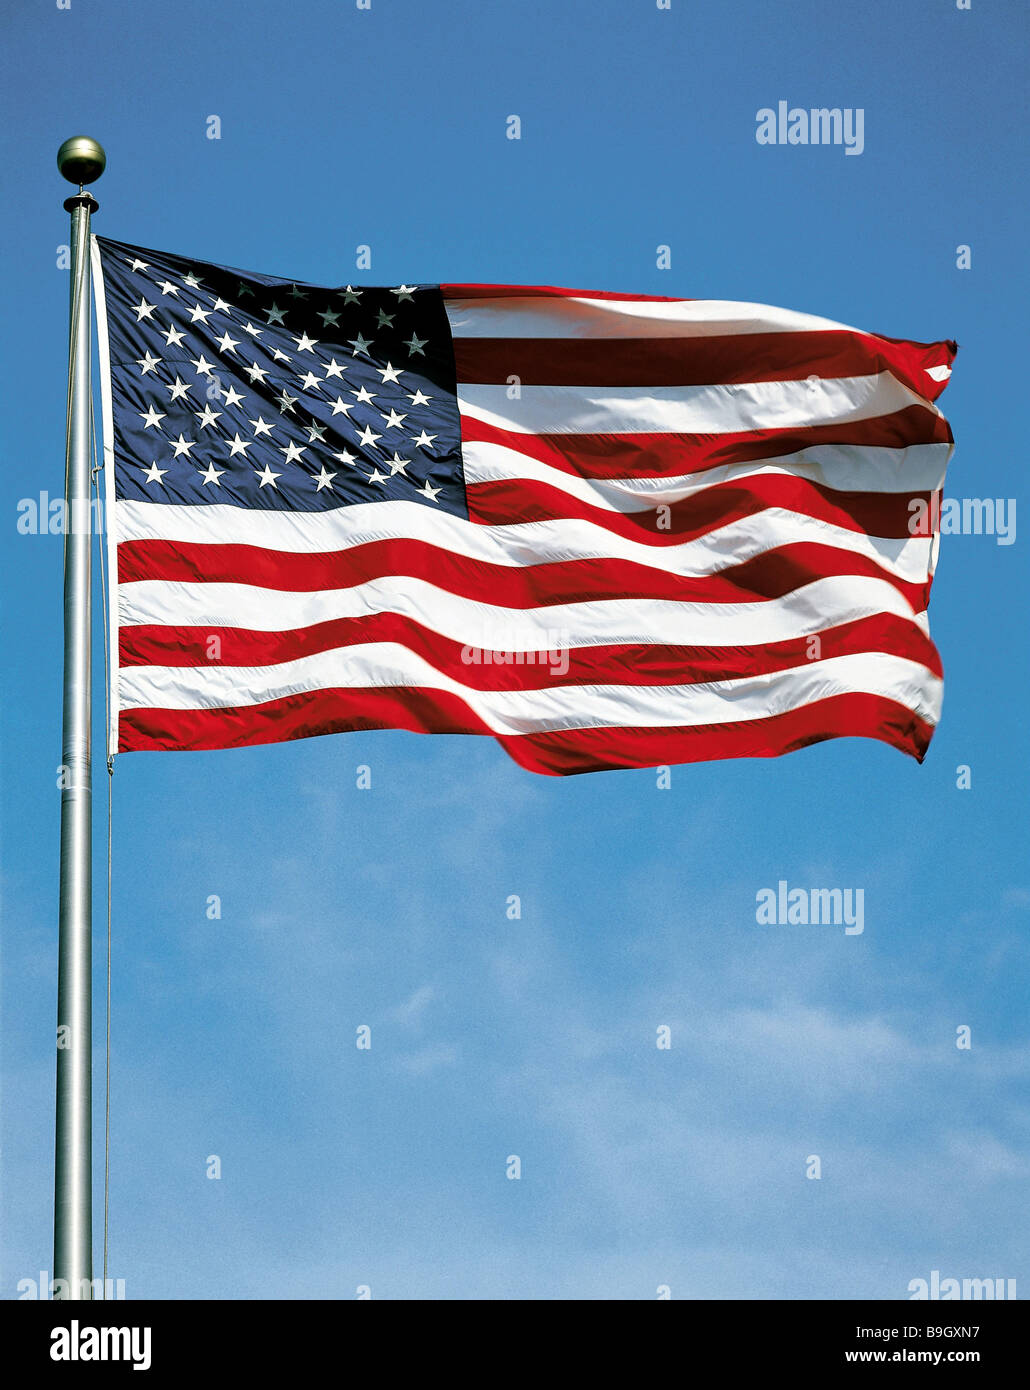 flagpole American flag America North America flag national-flags ensign national-colors wind blows patriotism national-pride Stock Photo